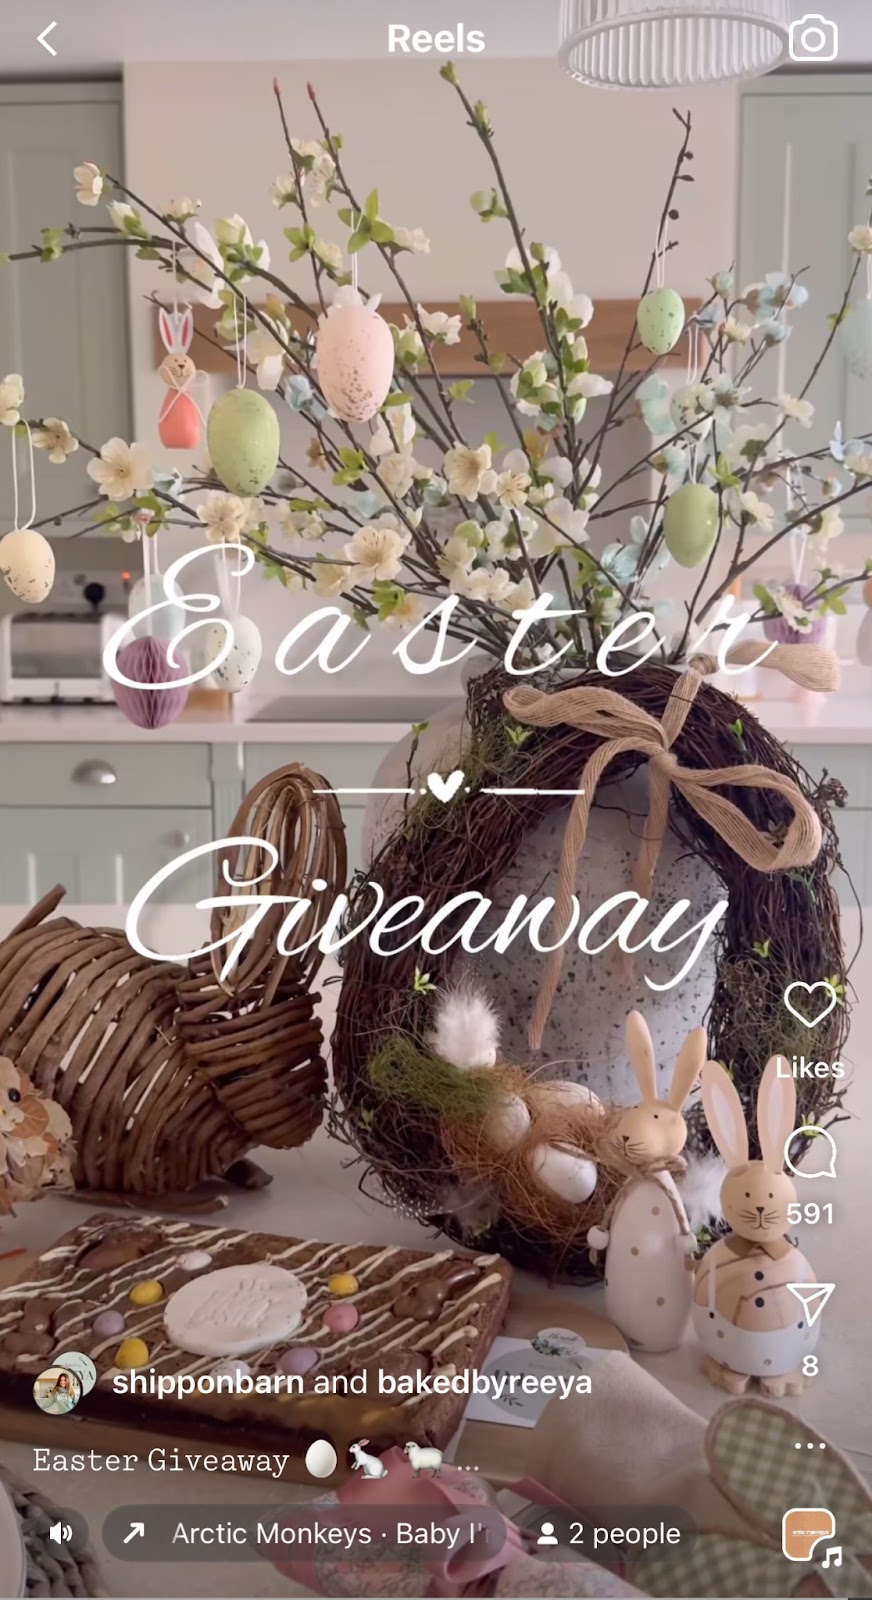 Easter marketing strategy example: Screenshot of an Instagram reel featuring the text "Easter Giveaway" in front of Easter decorations and themed baked goods